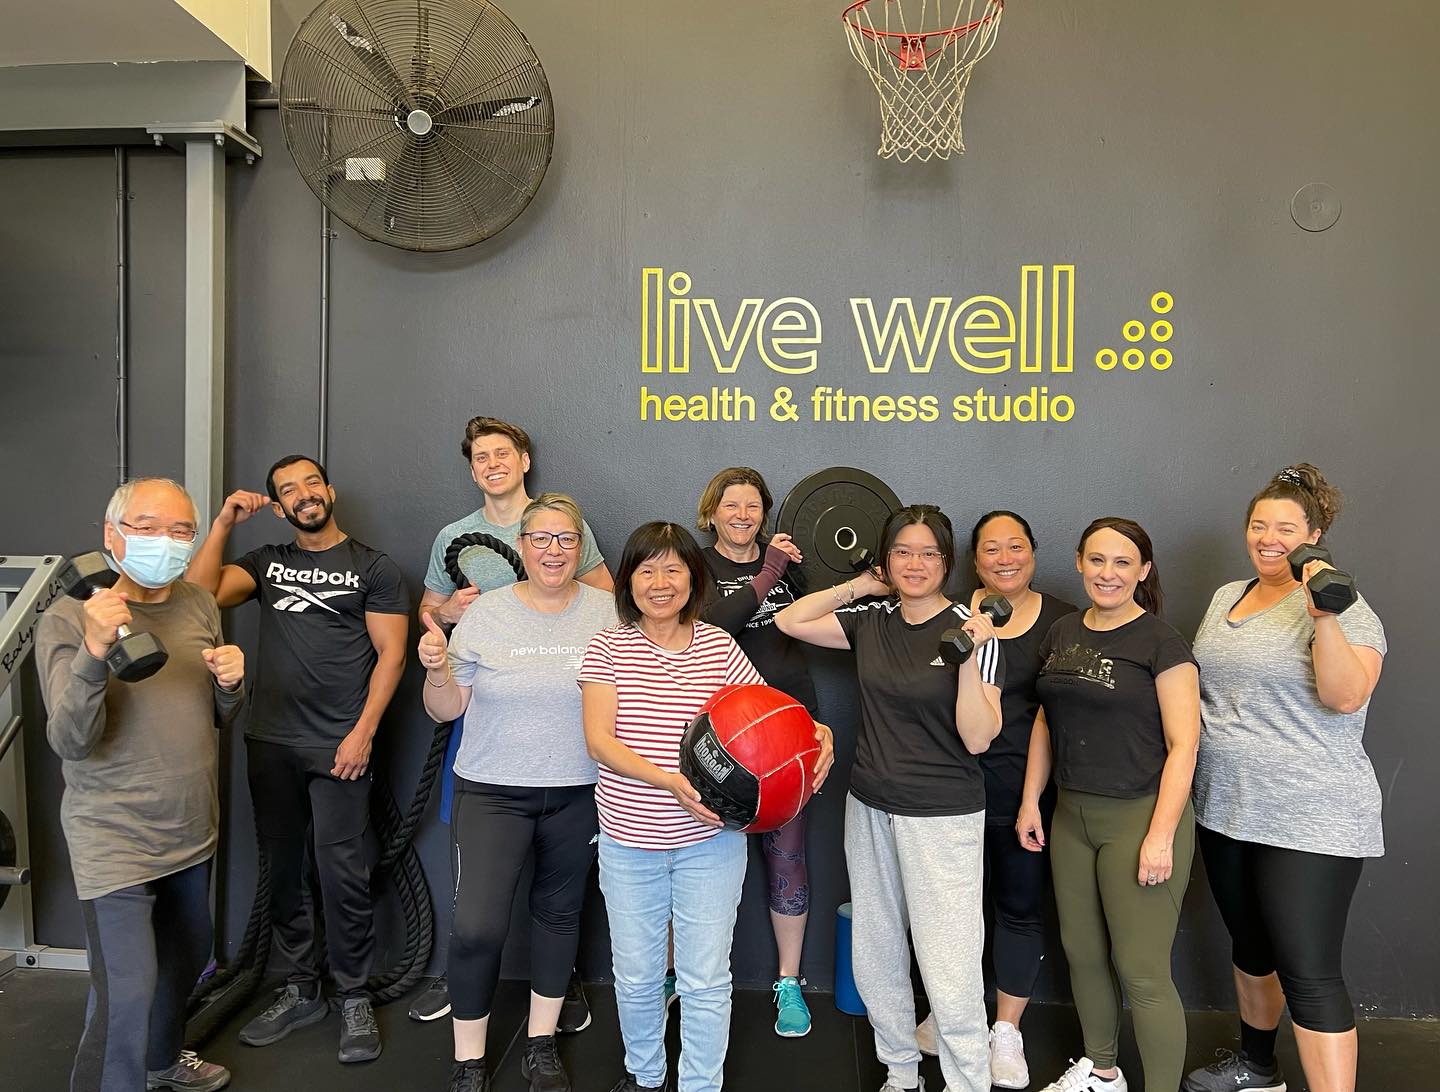 Kogarah’s Best Personal Training Studio: Discover a New You at Live Well